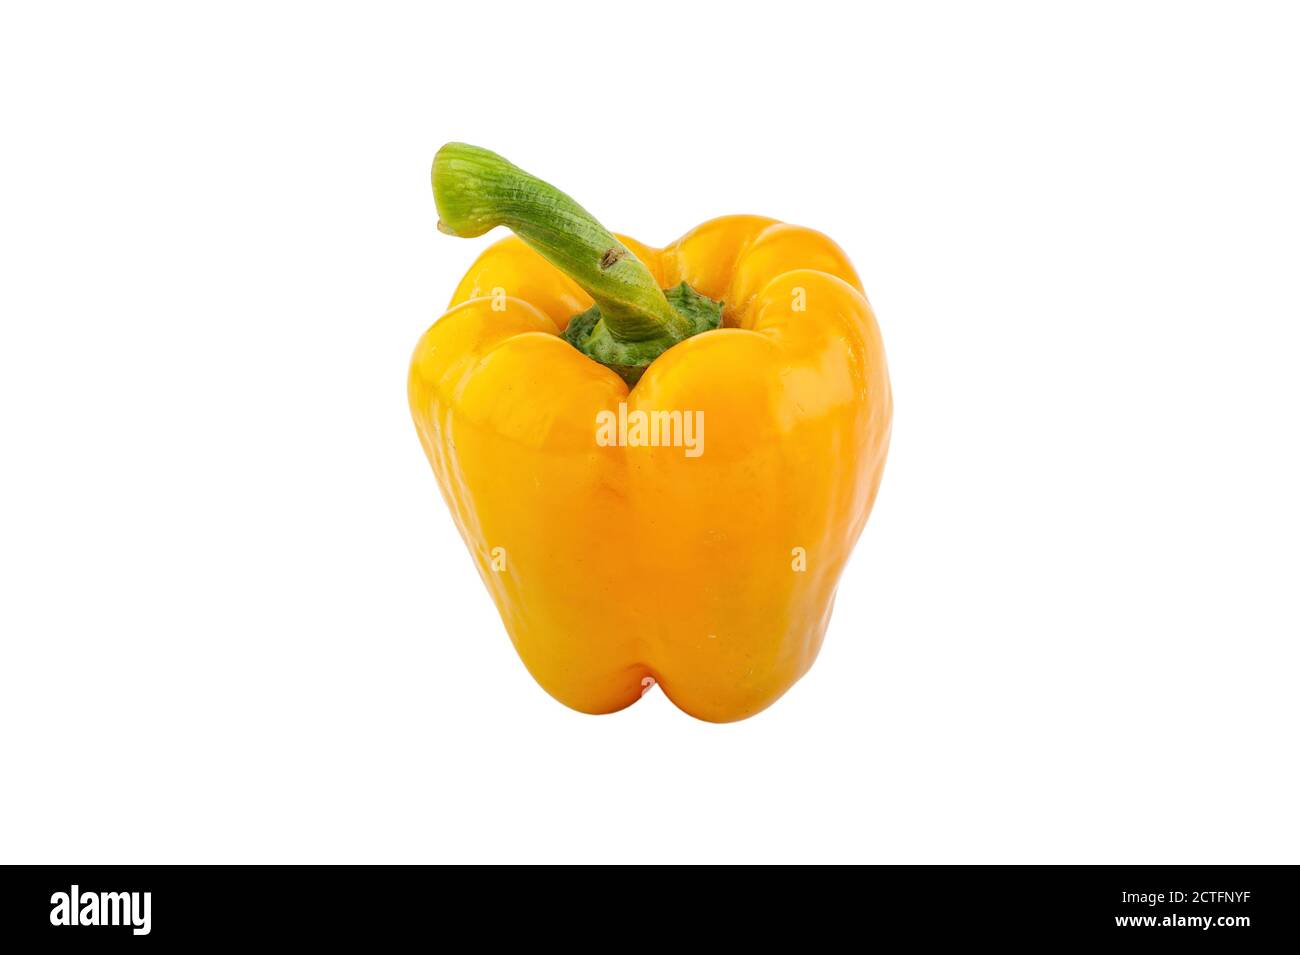 Yellow bell pepper isolated on white background. Stock Photo